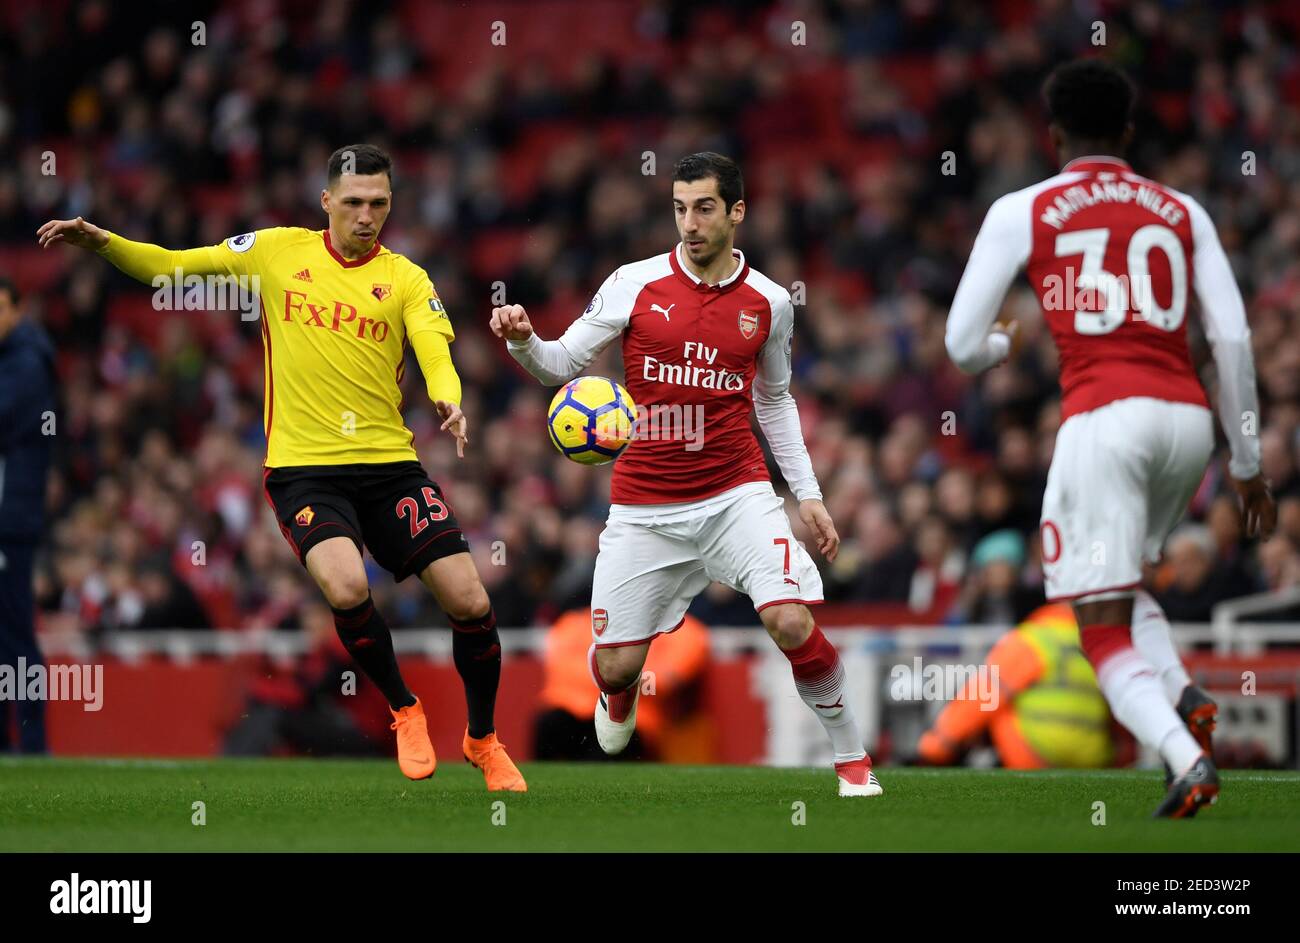 Soccer Football - Premier League - Arsenal vs Watford - Emirates Stadium, London, Britain - March 11, 2018   Arsenal's Henrikh Mkhitaryan in action with Watford's Jose Holebas     Action Images via Reuters/Tony O'Brien    EDITORIAL USE ONLY. No use with unauthorized audio, video, data, fixture lists, club/league logos or 'live' services. Online in-match use limited to 75 images, no video emulation. No use in betting, games or single club/league/player publications.  Please contact your account representative for further details. Stock Photo